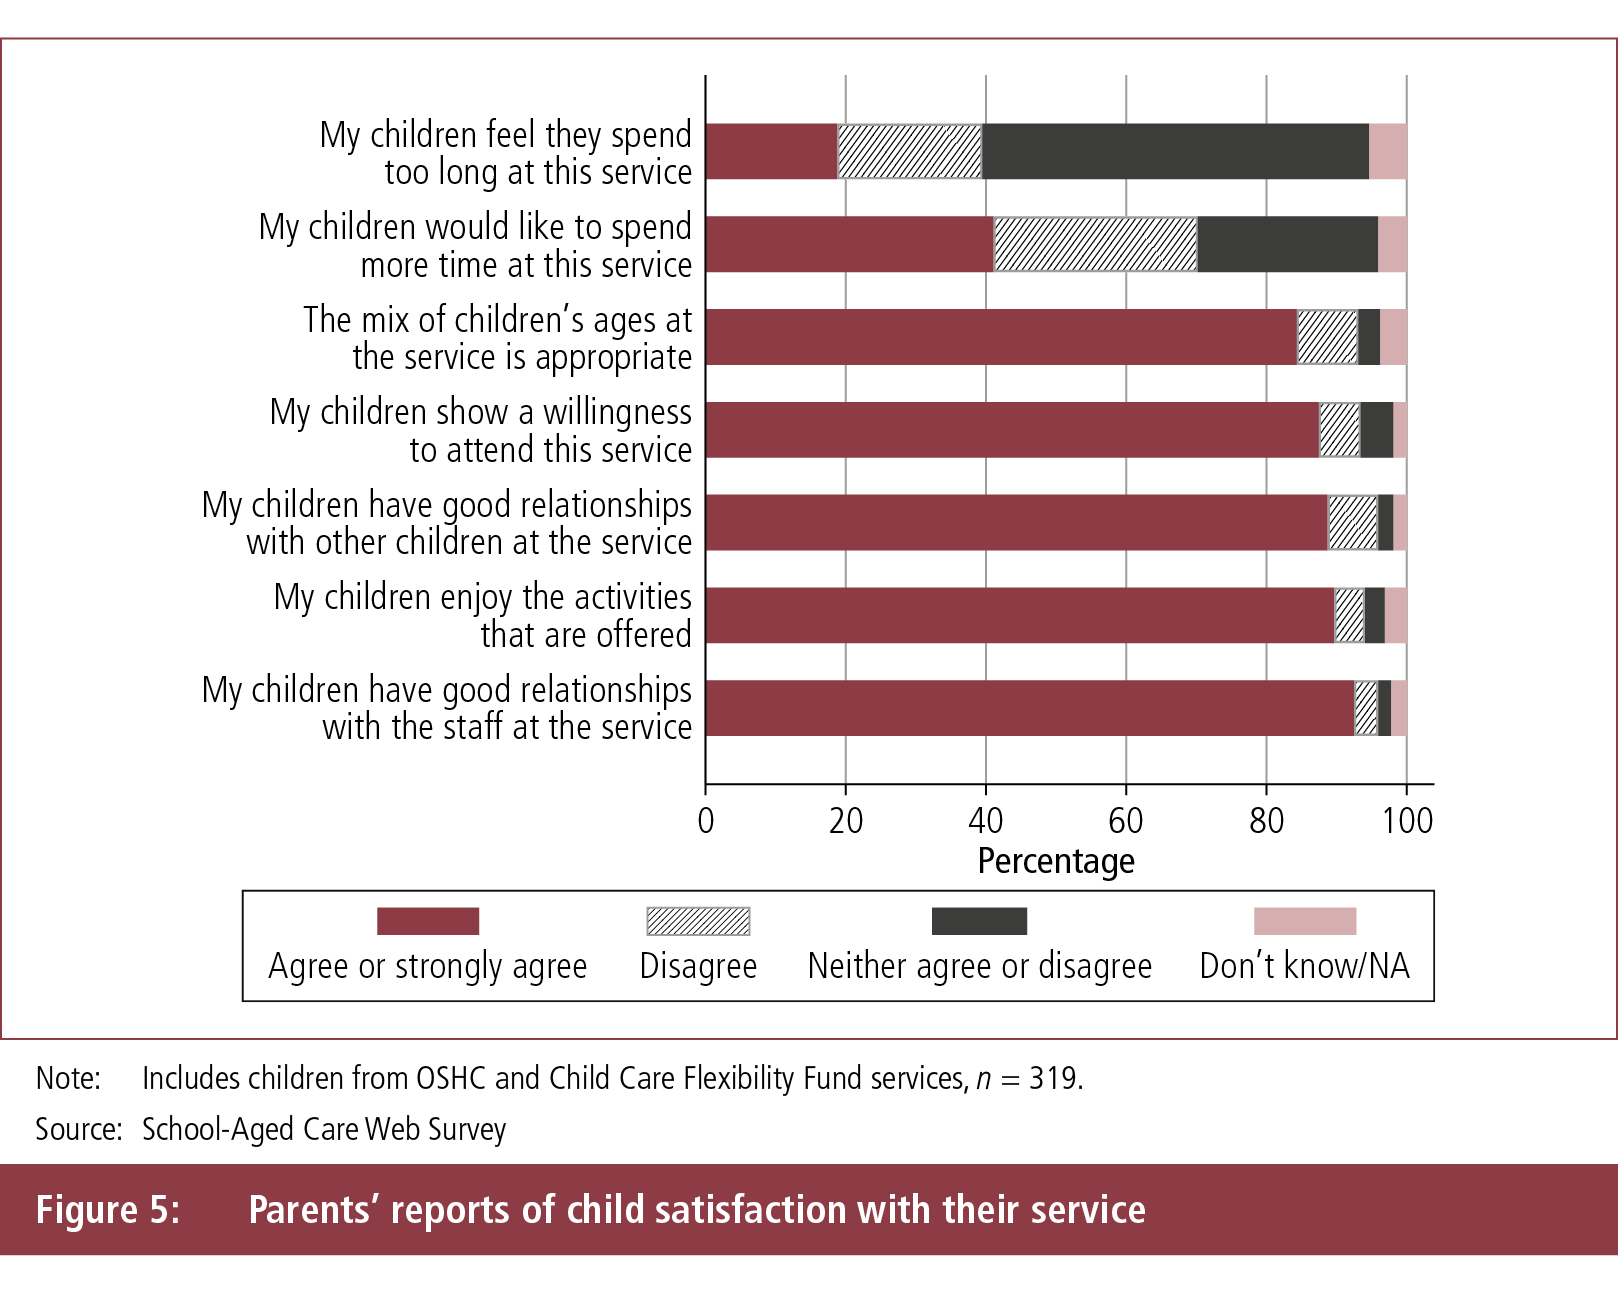 Figure 5: Parents' reports of child satisfaction with their service. Figure described in text.